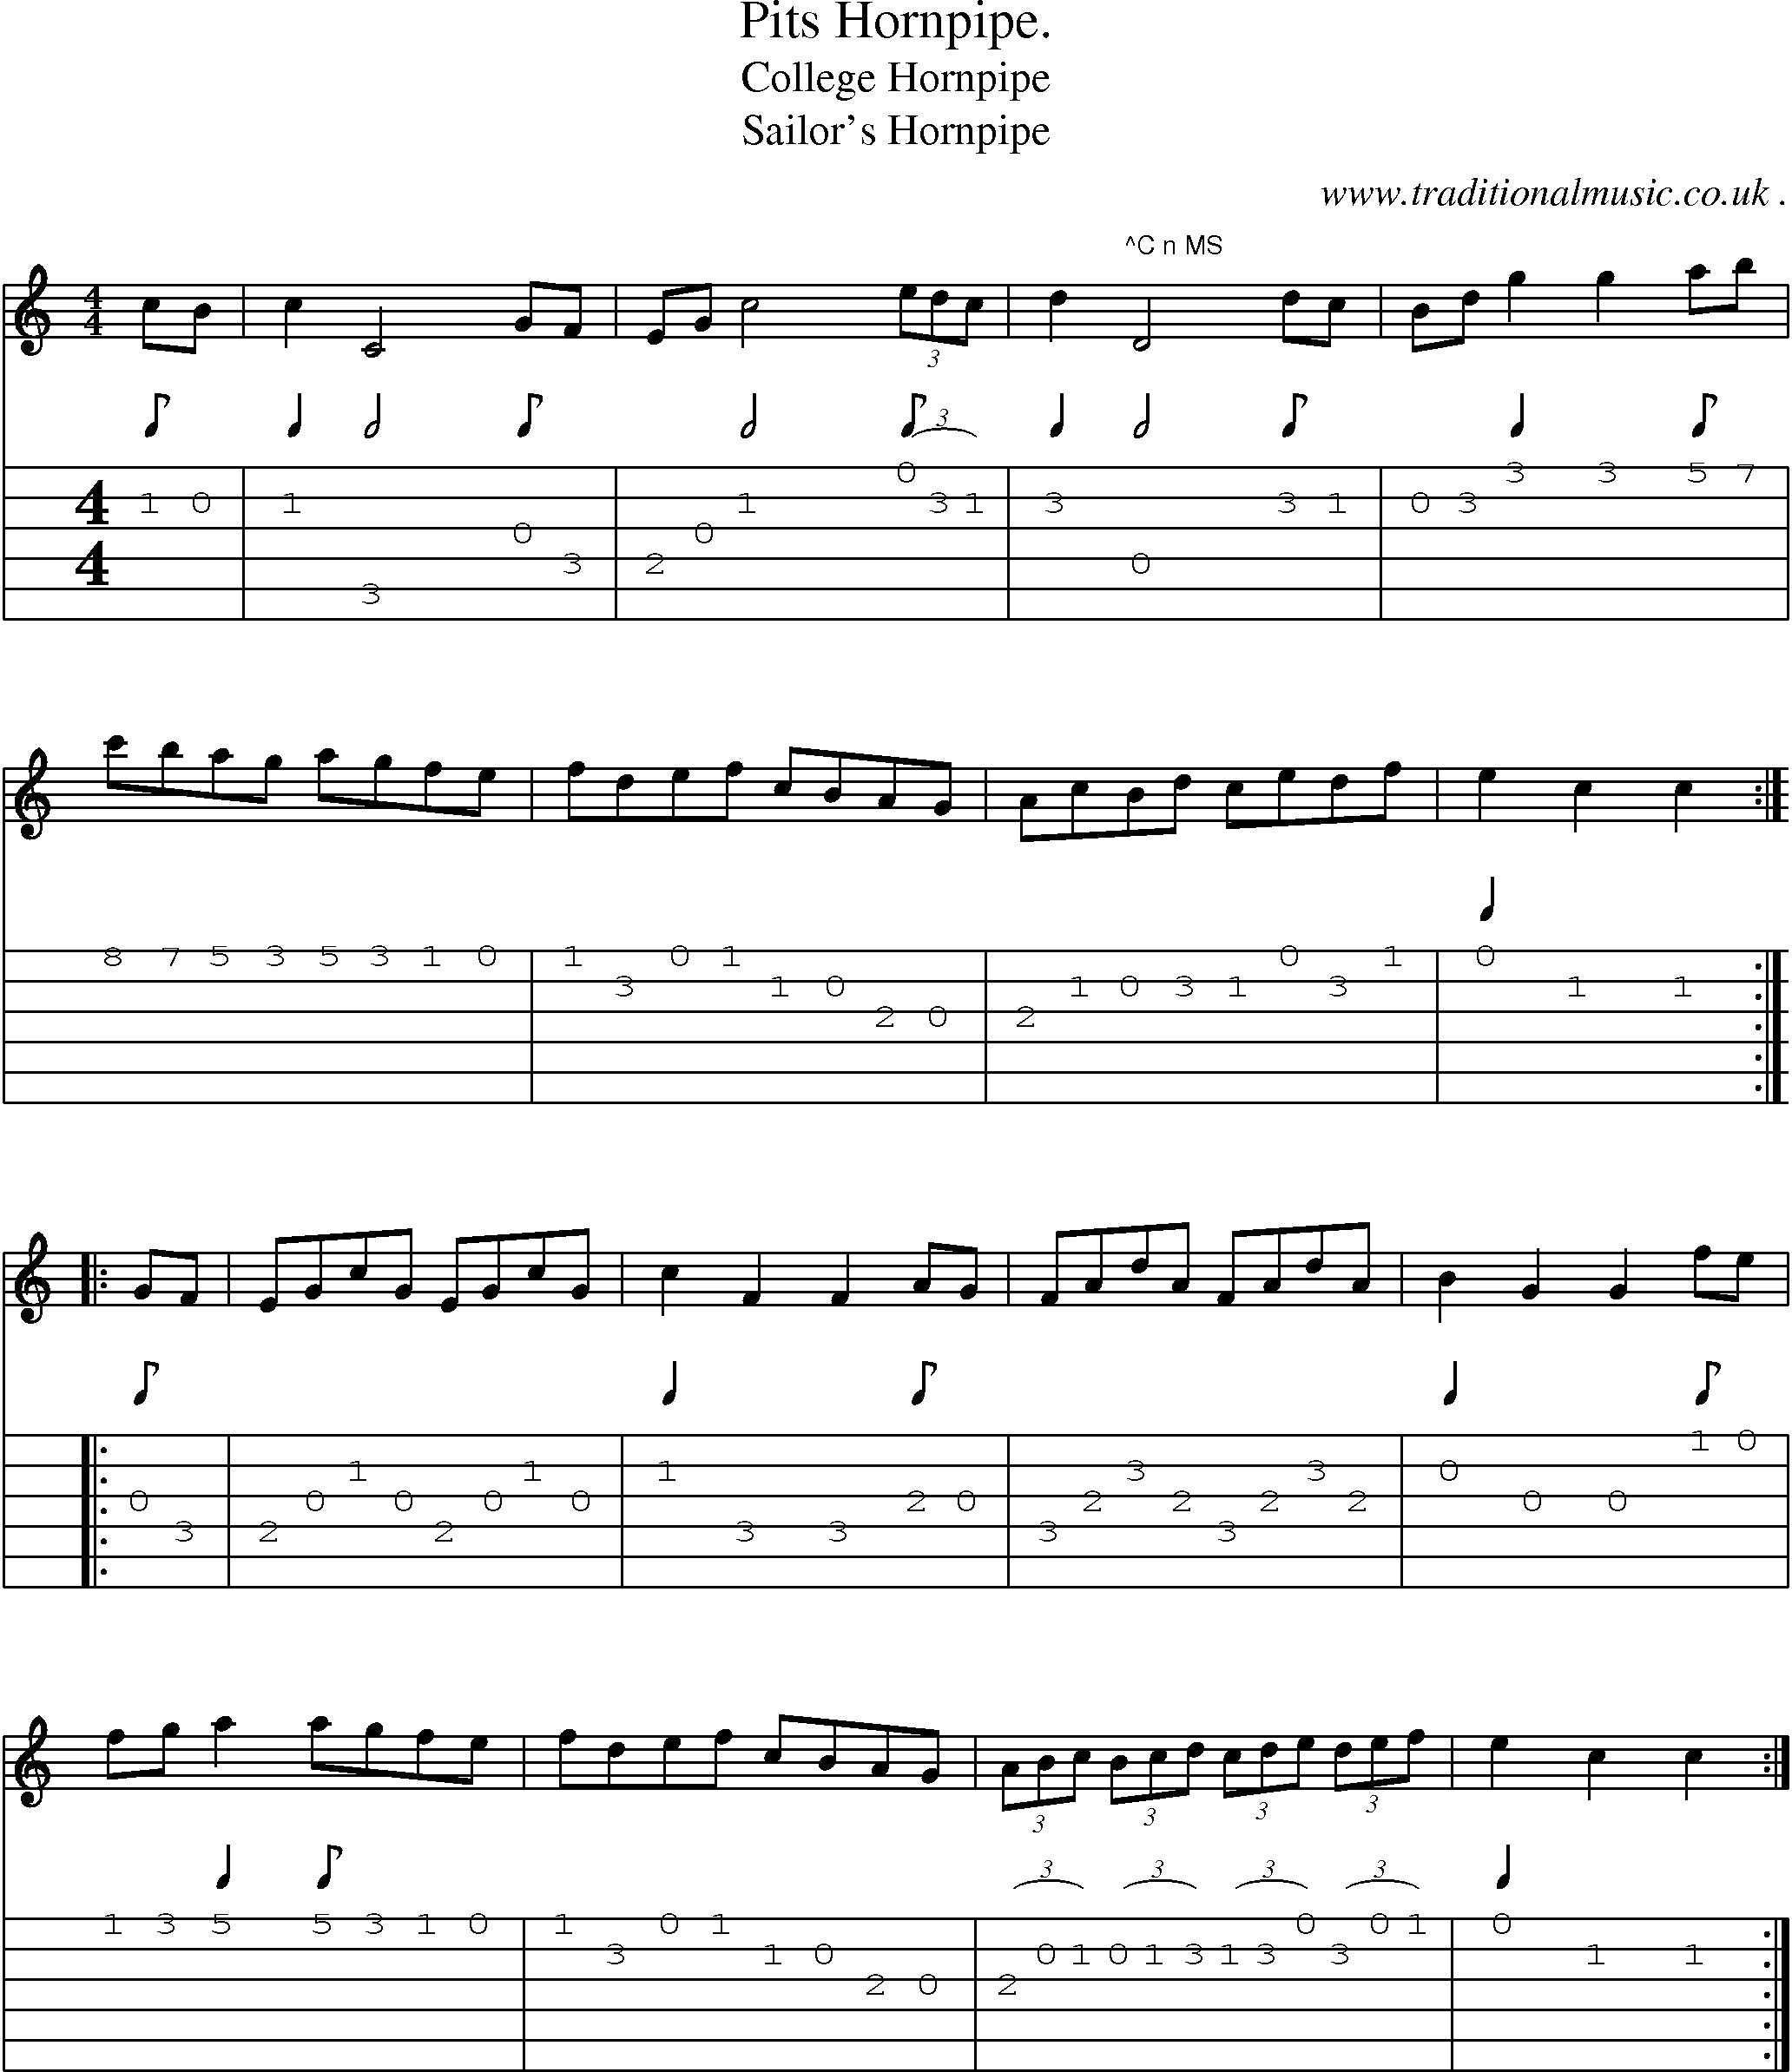 Sheet-Music and Guitar Tabs for Pits Hornpipe